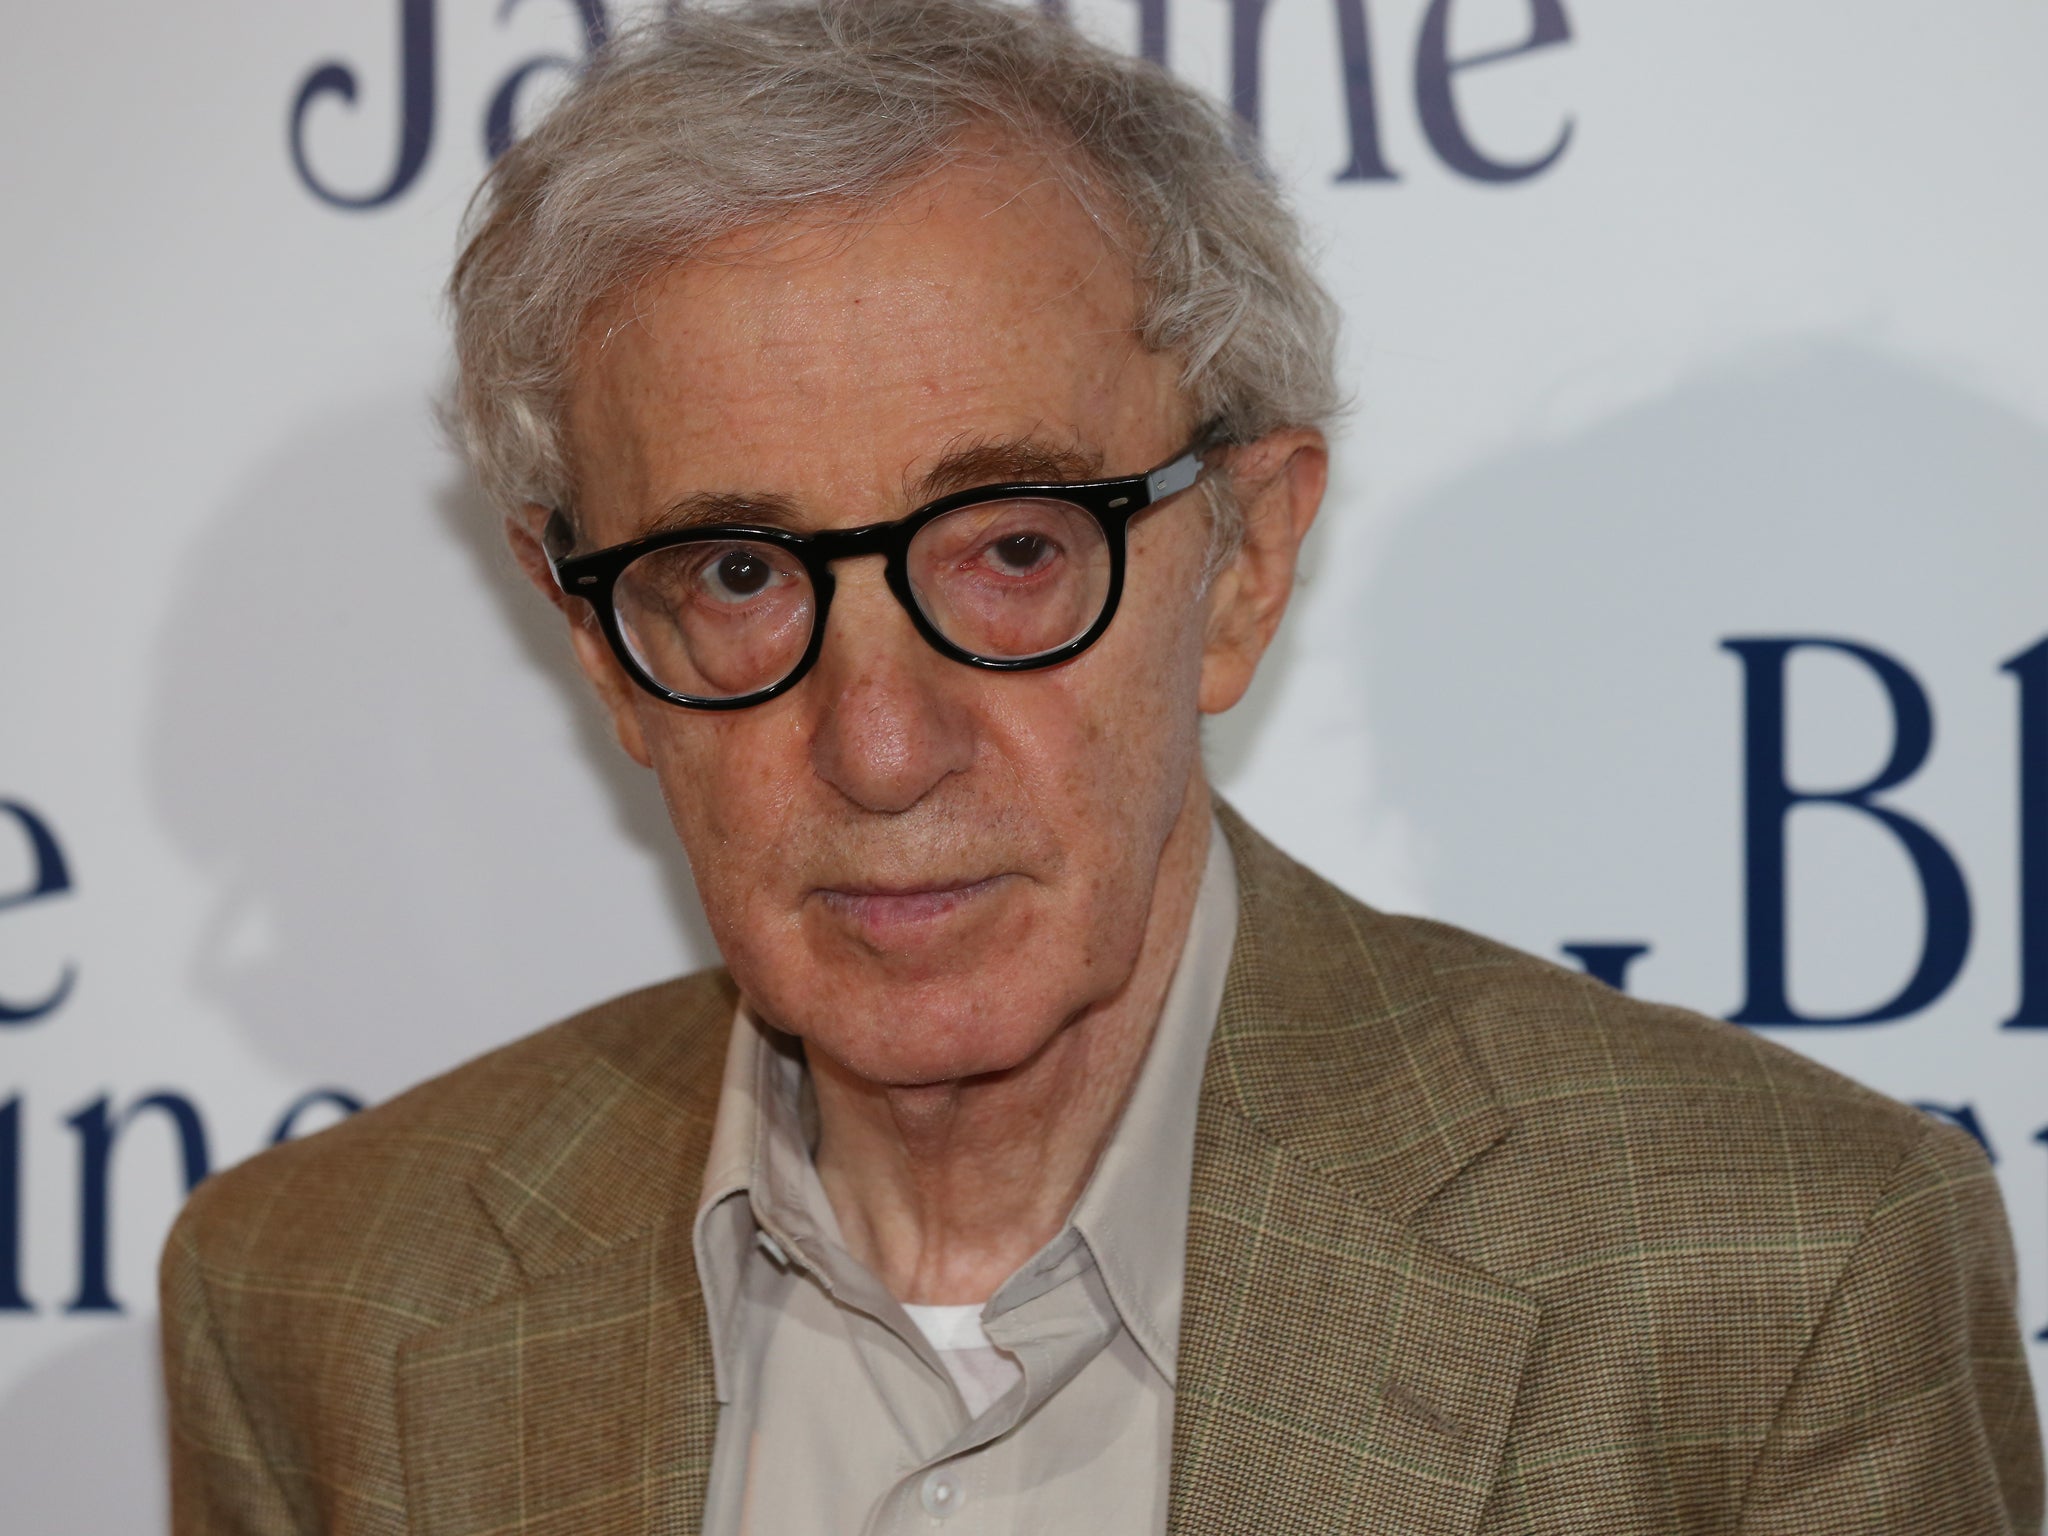 Woody Allen's latest film “Blue Jasmine,” earned three Academy Award nominations, including a screenwriting nomination for the writer and director